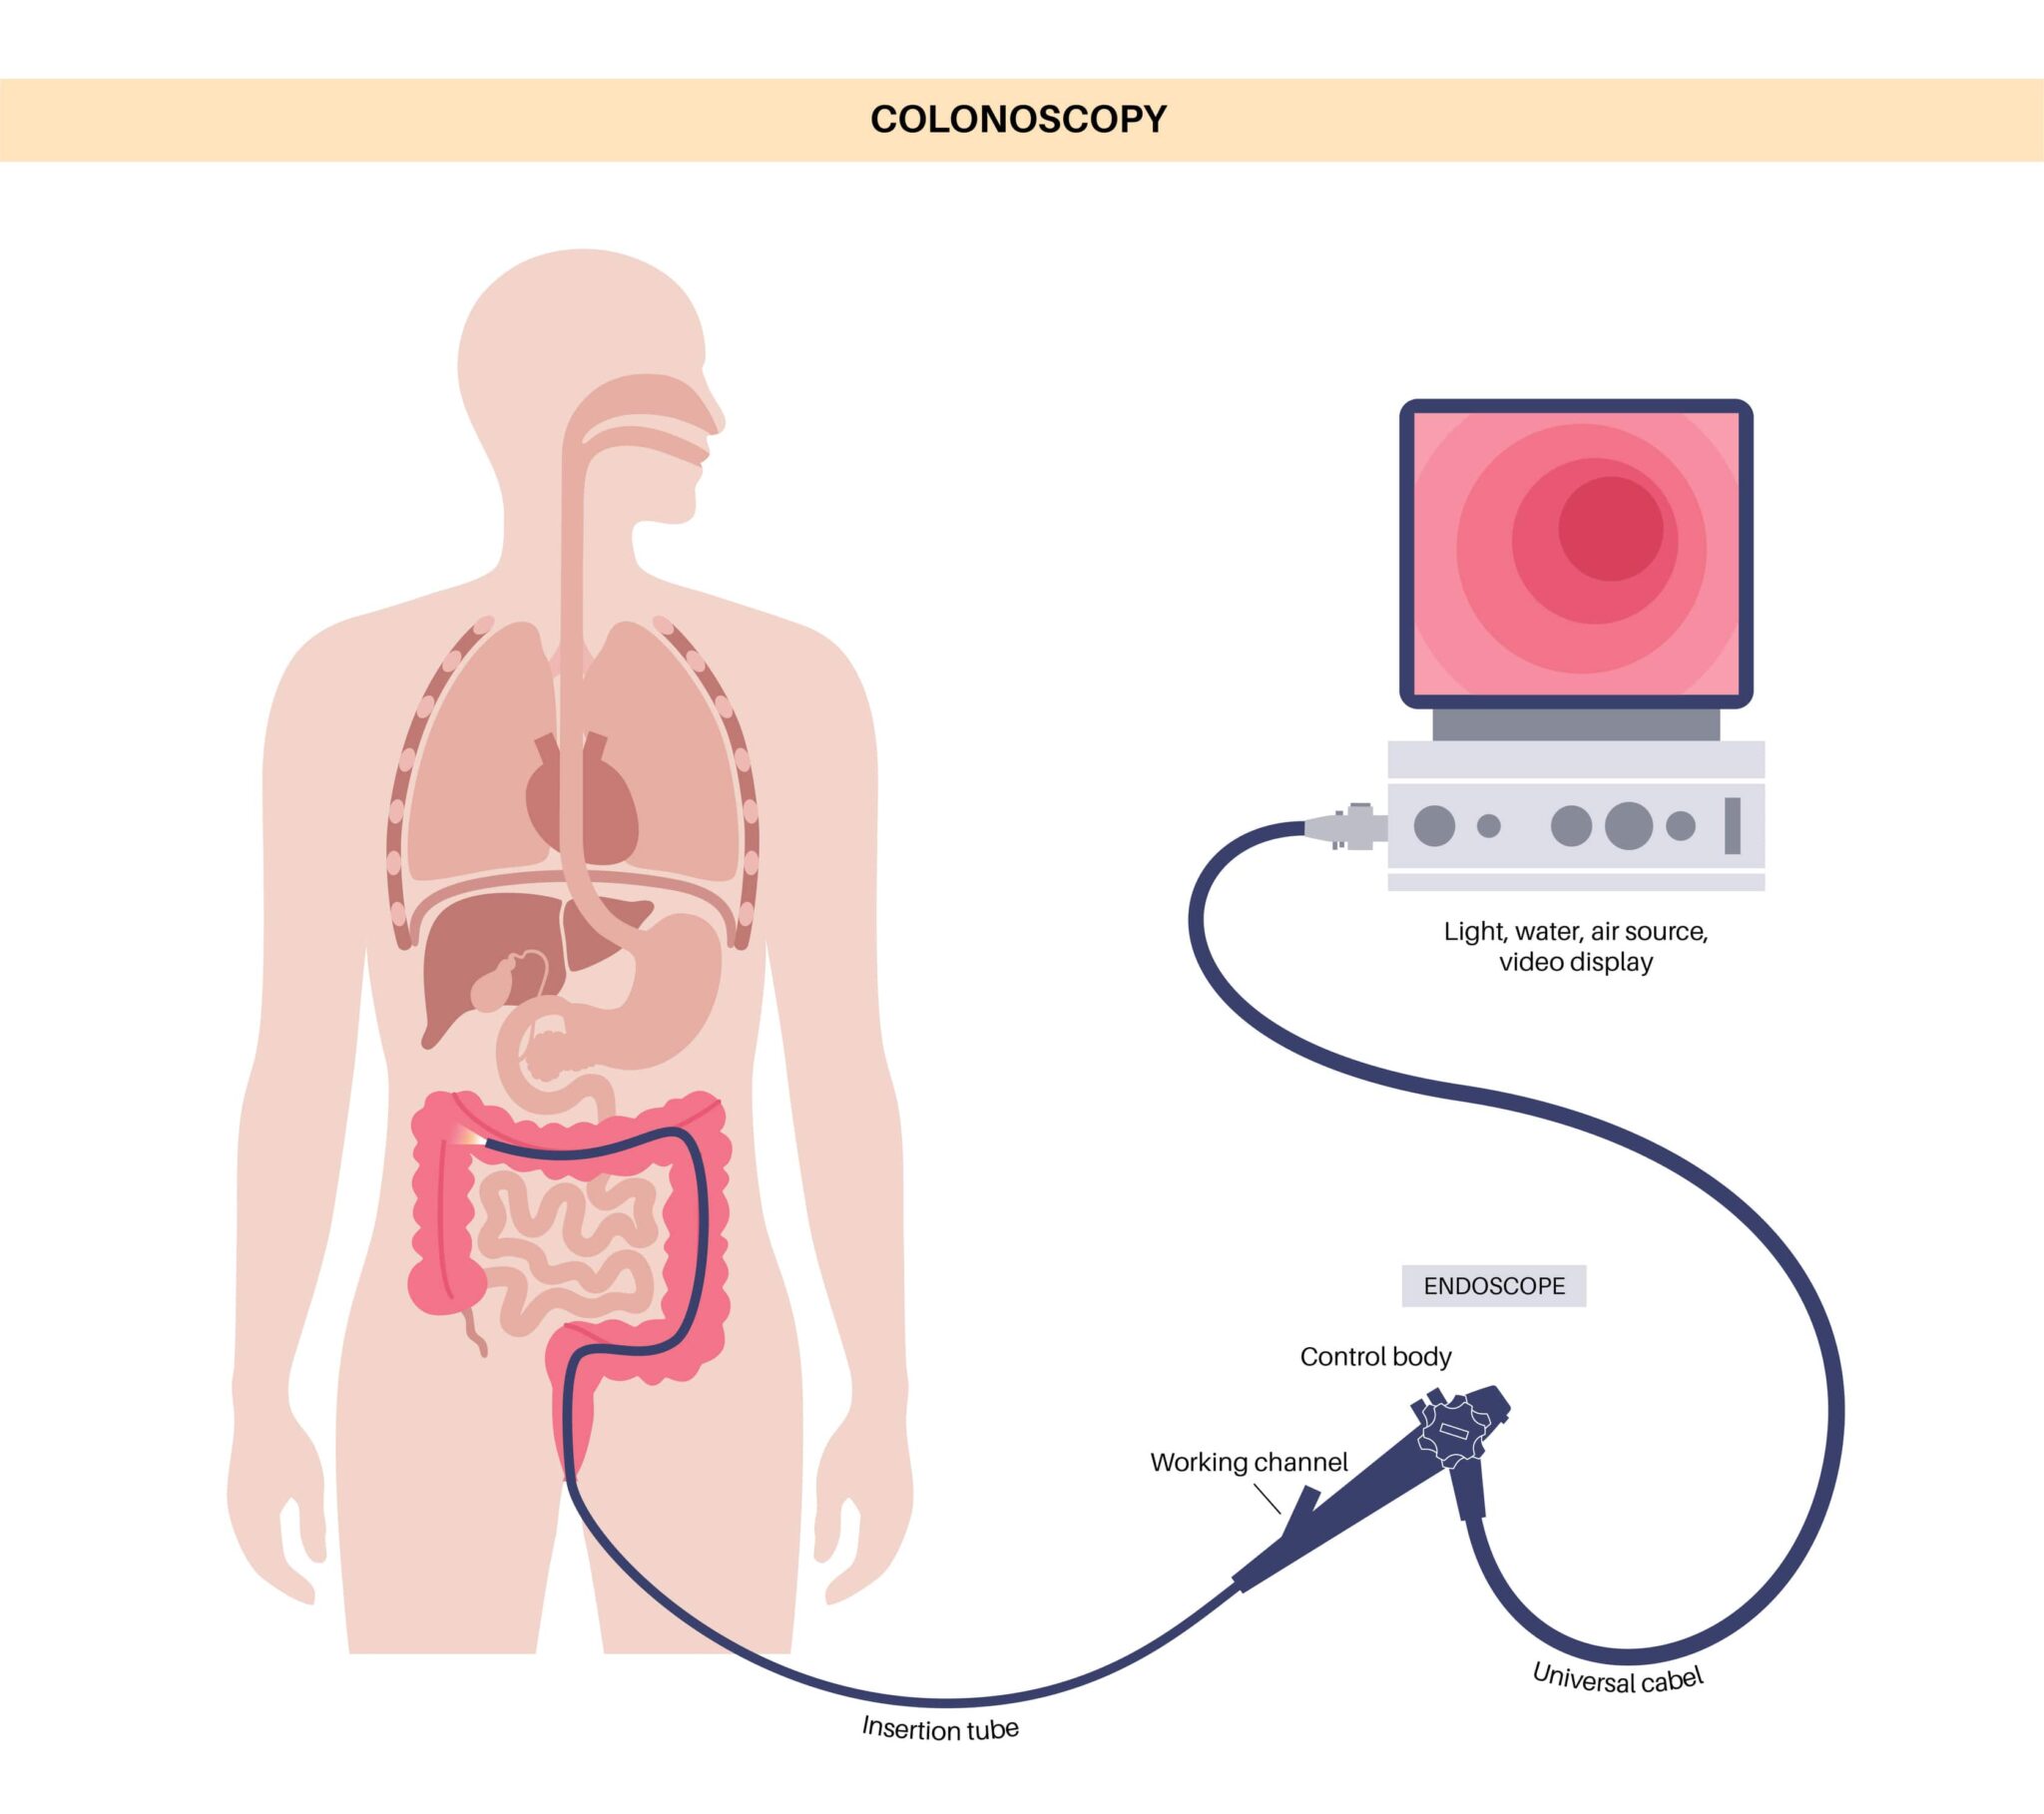 colonoscopy screening test using an endoscope with fiber optic camera to screen for colorectal cancer